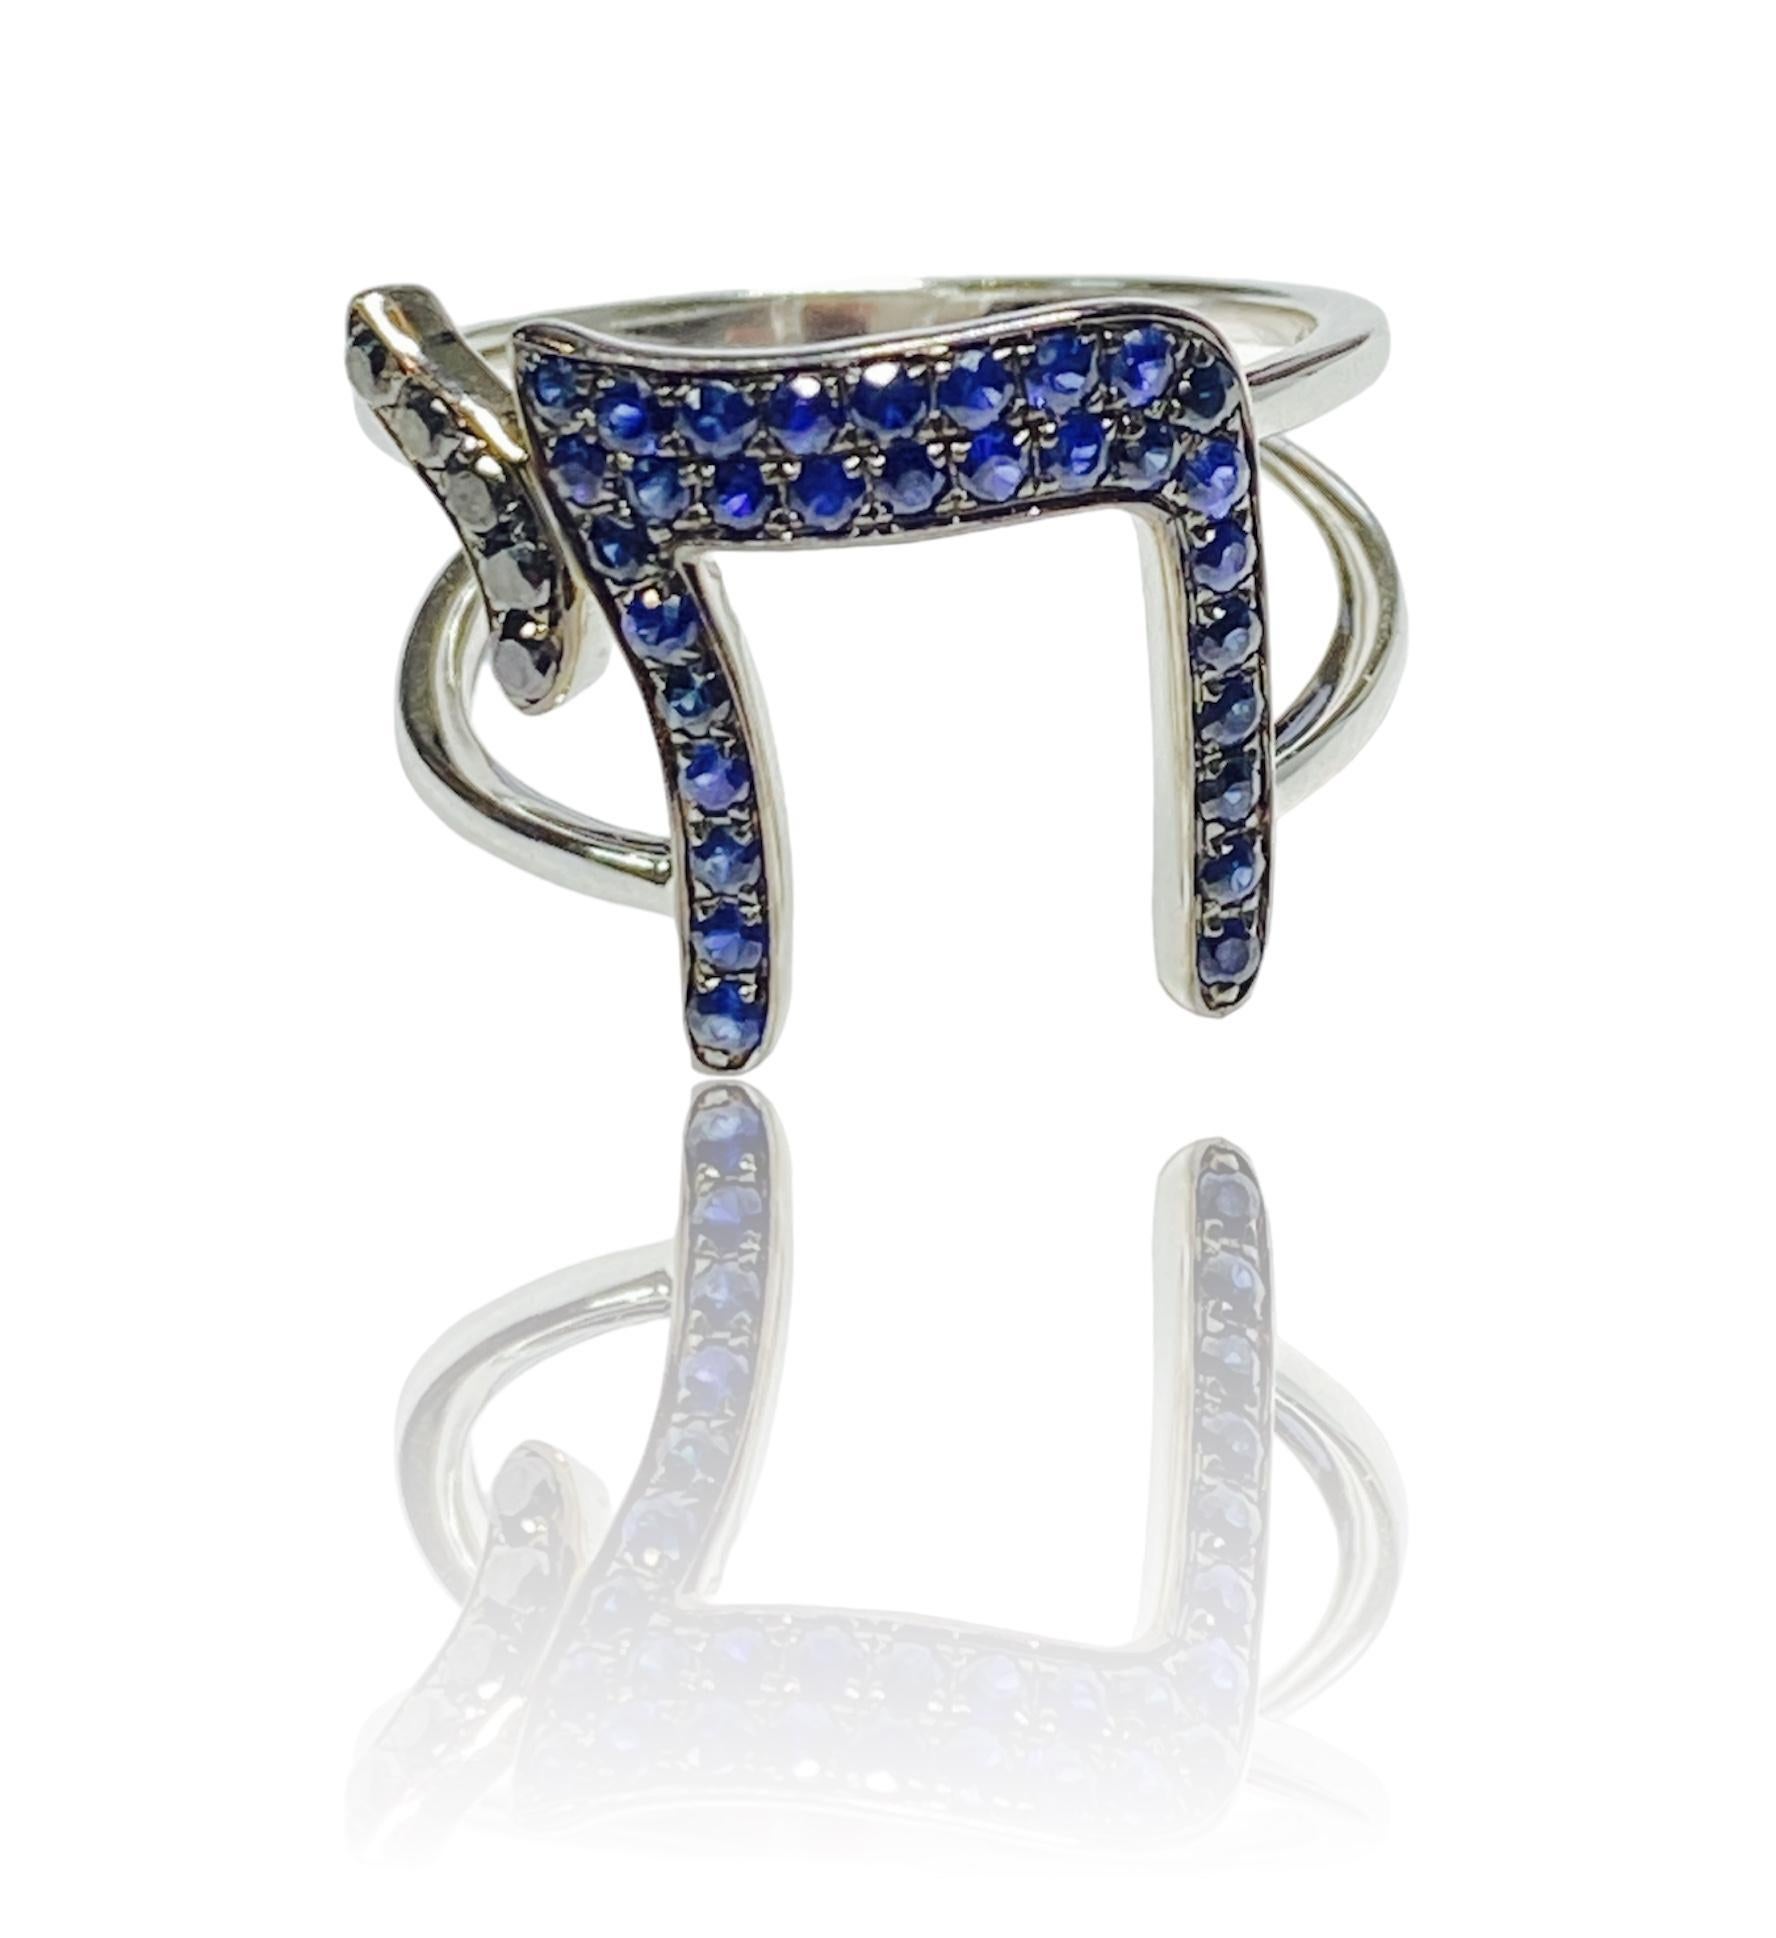 Solid 14K White Gold Sapphire Chai Design Ring 

14K White Gold 
0.50 total carats of genuine blue sapphire gemstones 
Size 7 (sizeable)
Fall in love with this piece that symbolizes 'LIFE' fertility and eternity. 

Selling Price $1,799.00
 A free